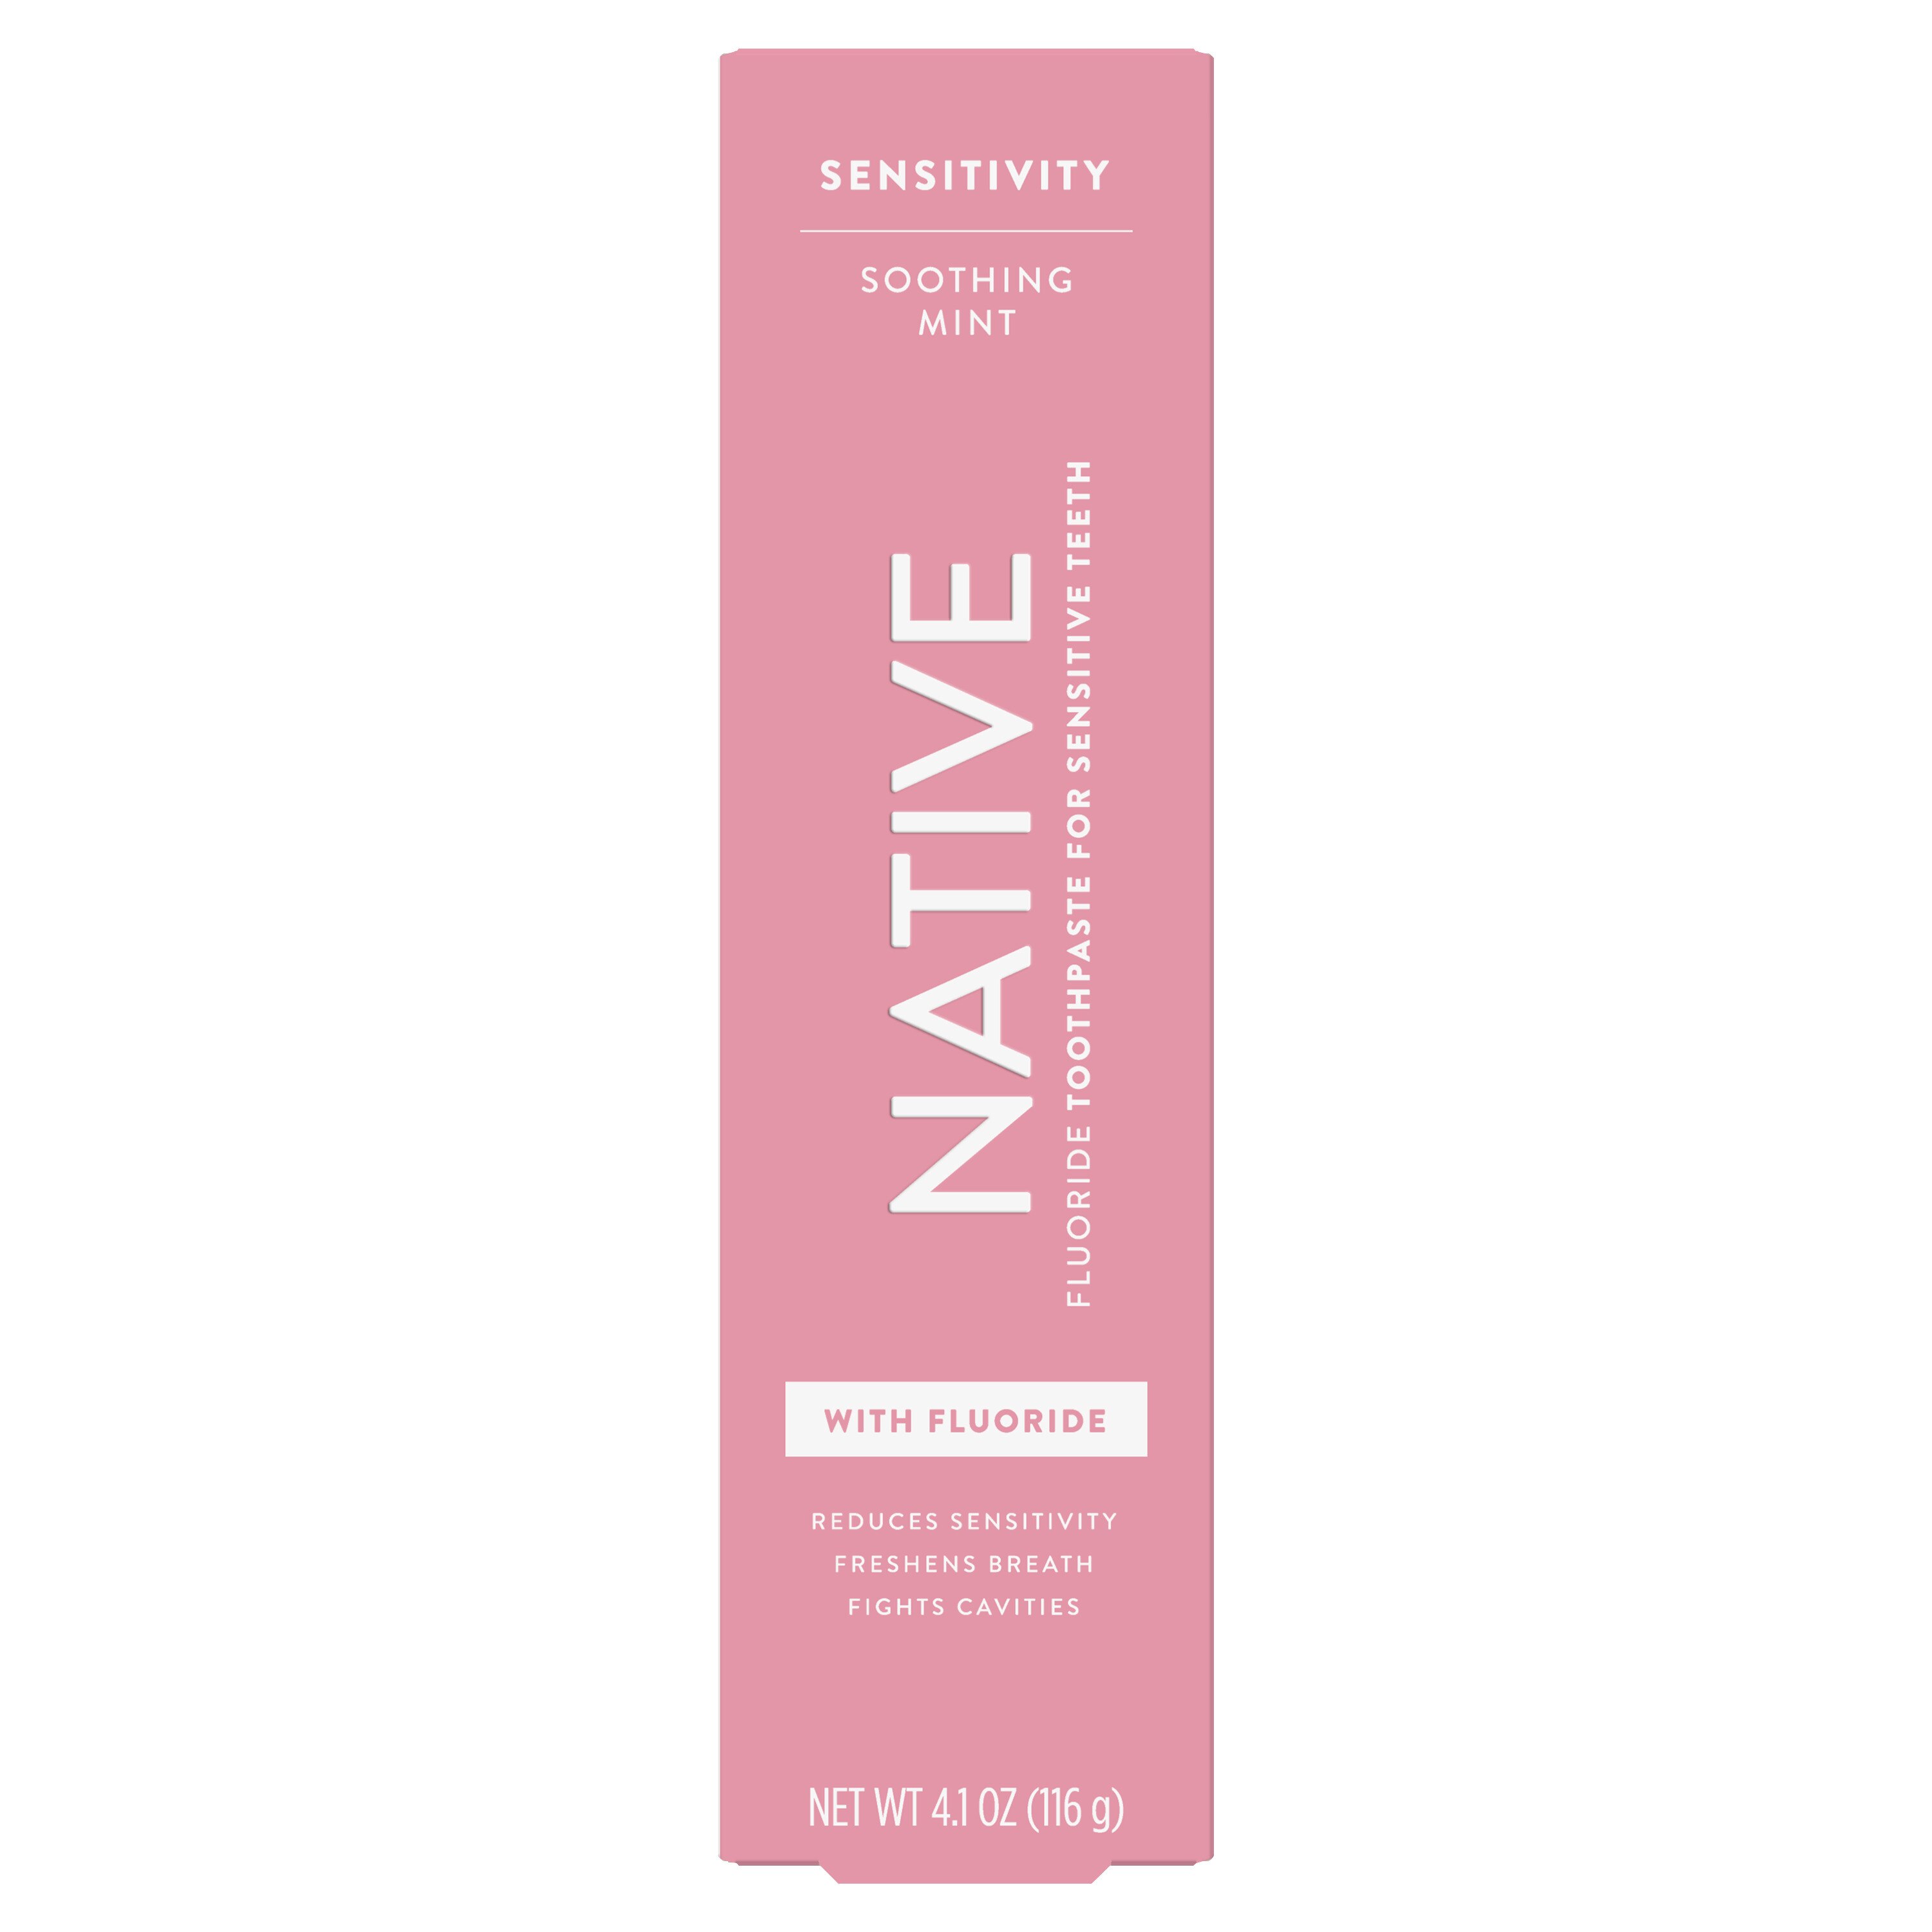 Native Sensitivity Soothing Mint Fluoride Anticavity Toothpaste, 4.1 OZ